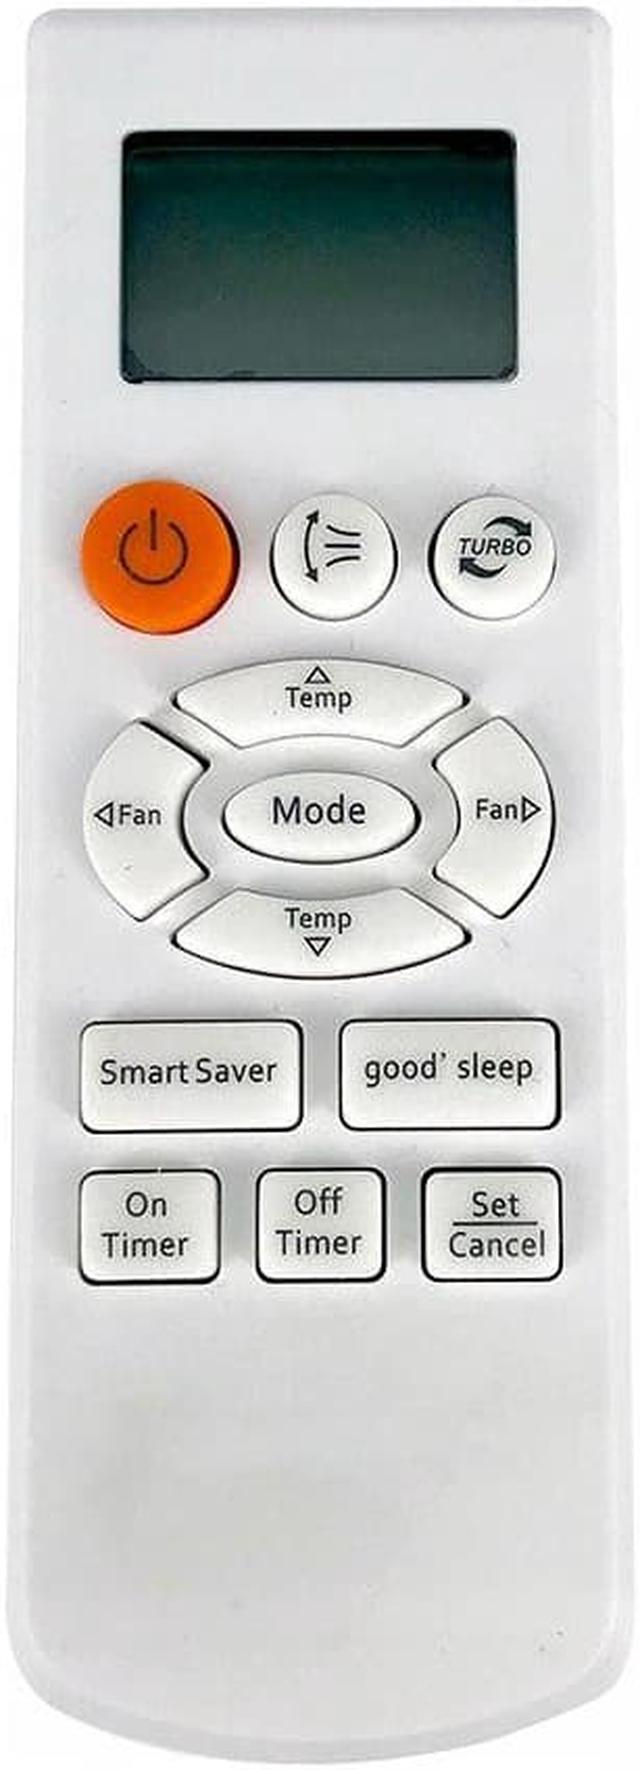 kunst afbryde Mediator Replacement Remote Control Compatible for Samsung air conditioner AS  Appliance Parts - Newegg.com